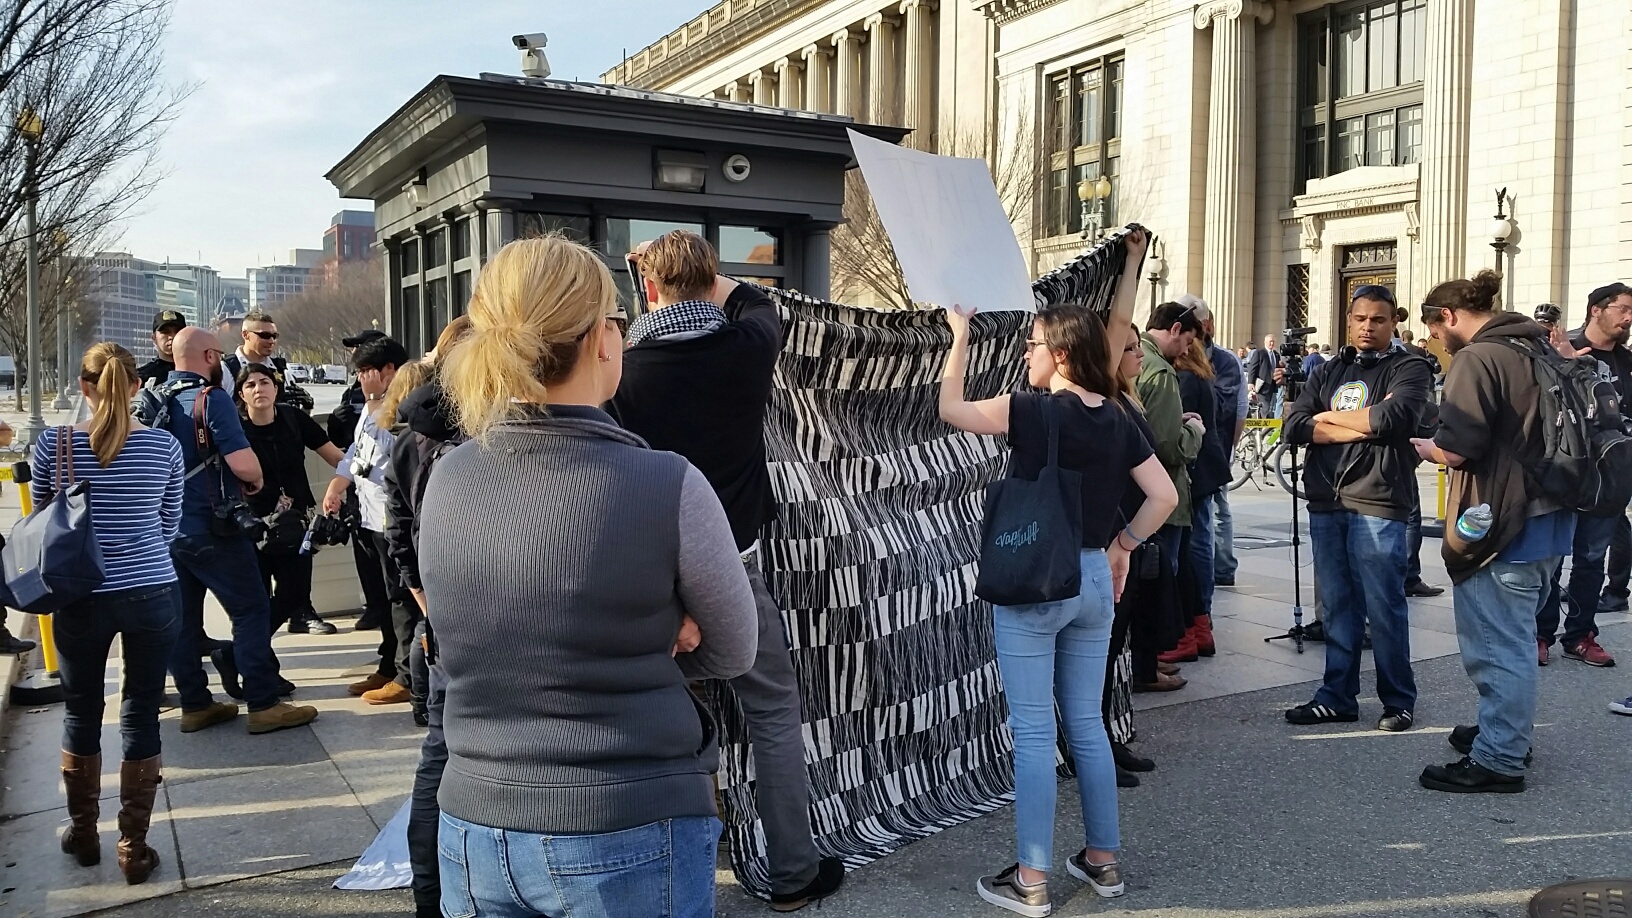 This was scene outside the White House, where counter protesters blocked the view of a group that claimed it intended to burn a Quran on Saturday, Dec. 12, 2015. (WTOP/Kathy Stewart)